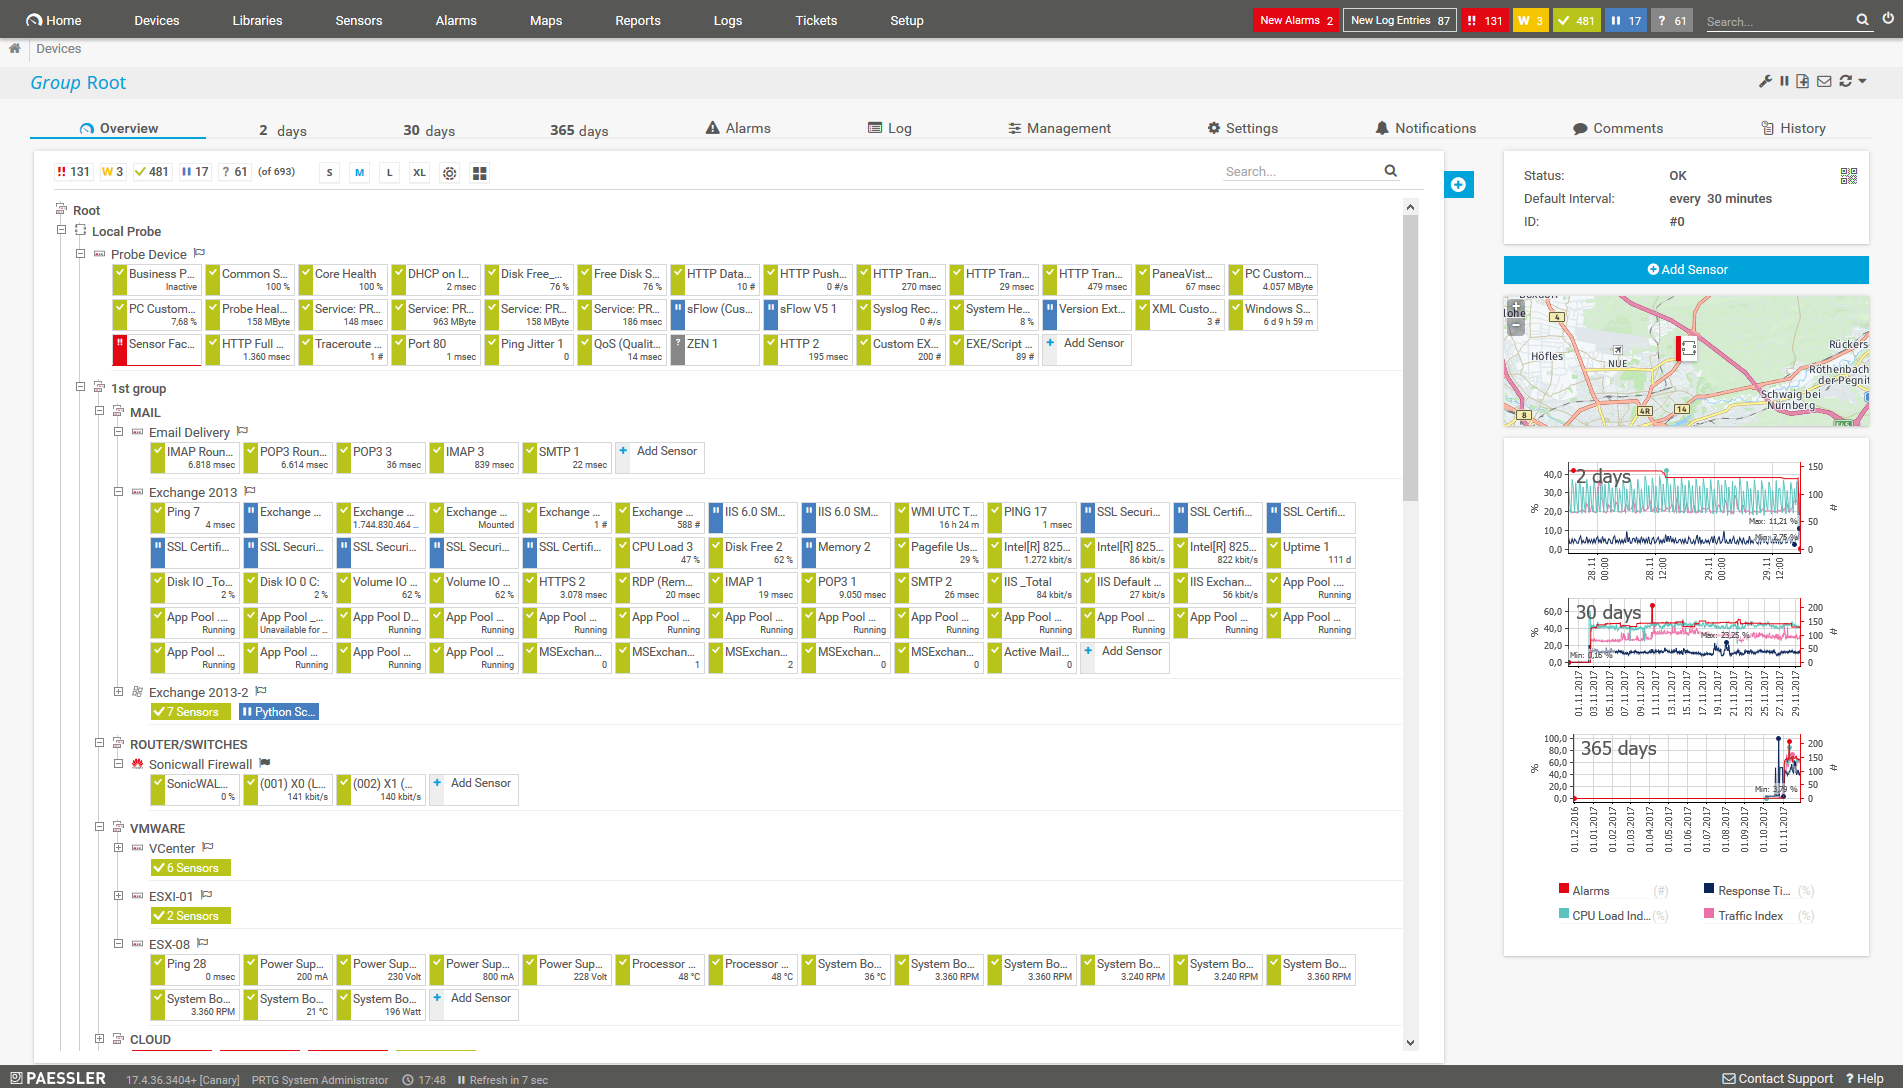 Device tree view of your complete monitoring setup